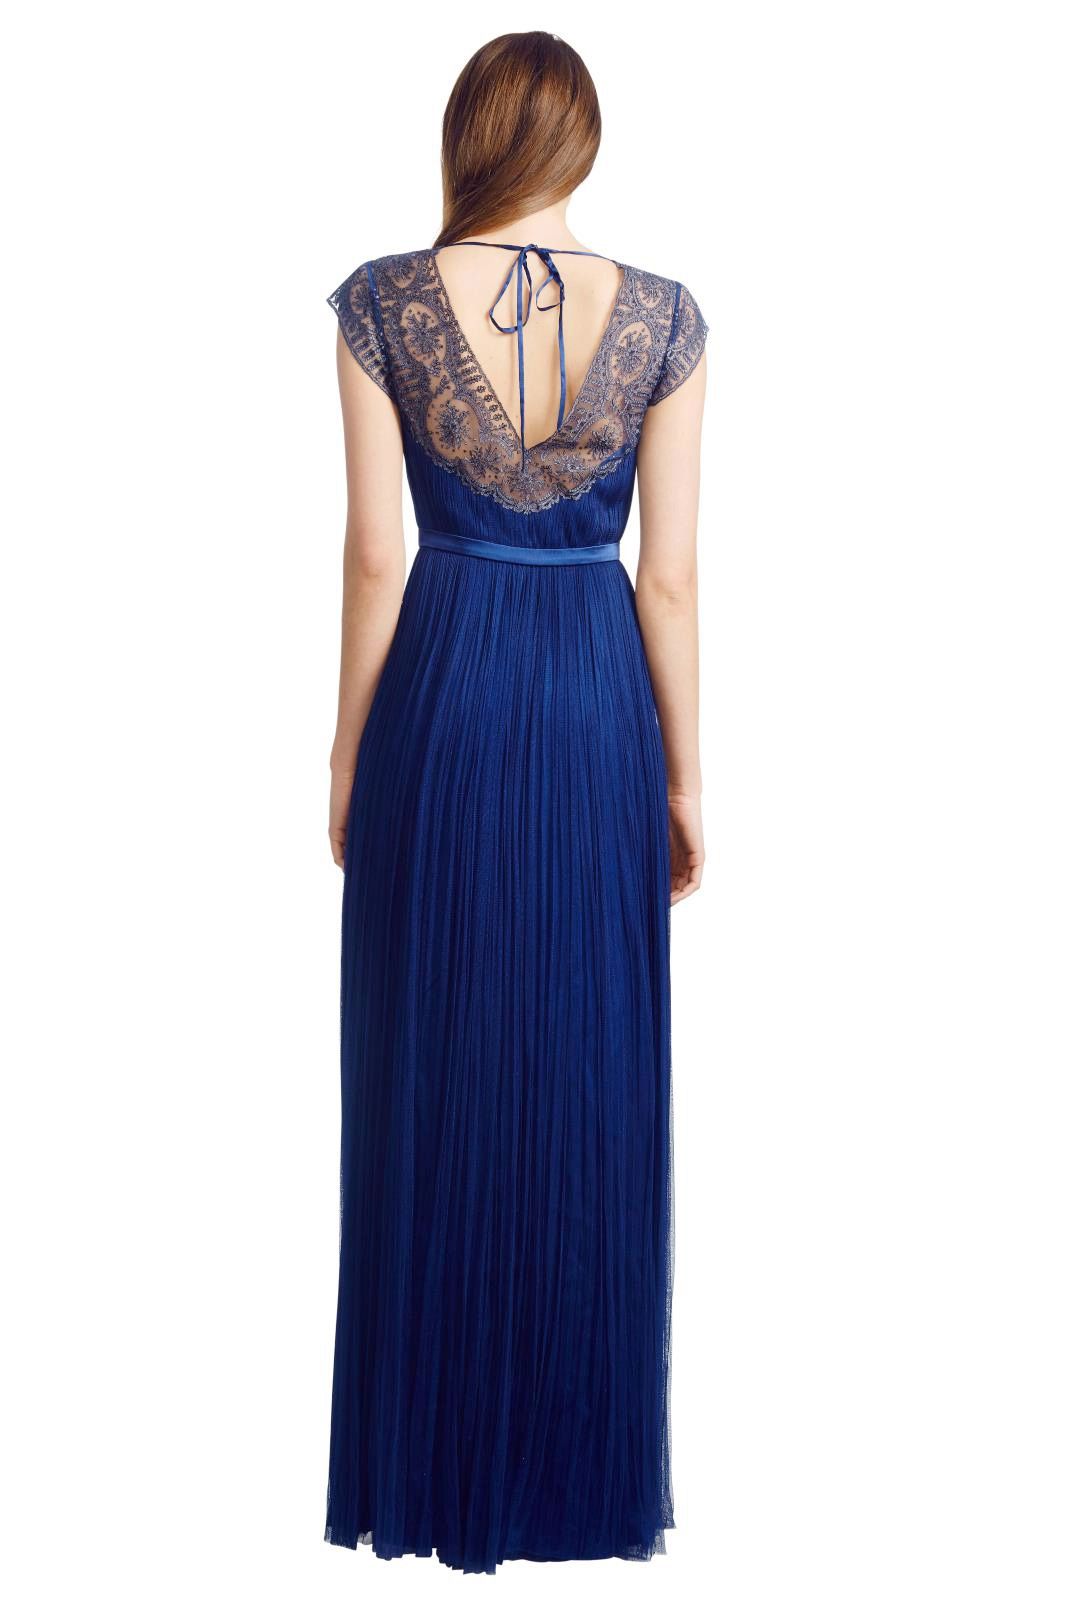 Catherine Deane - Silk Tulle Gown - Blue - Back